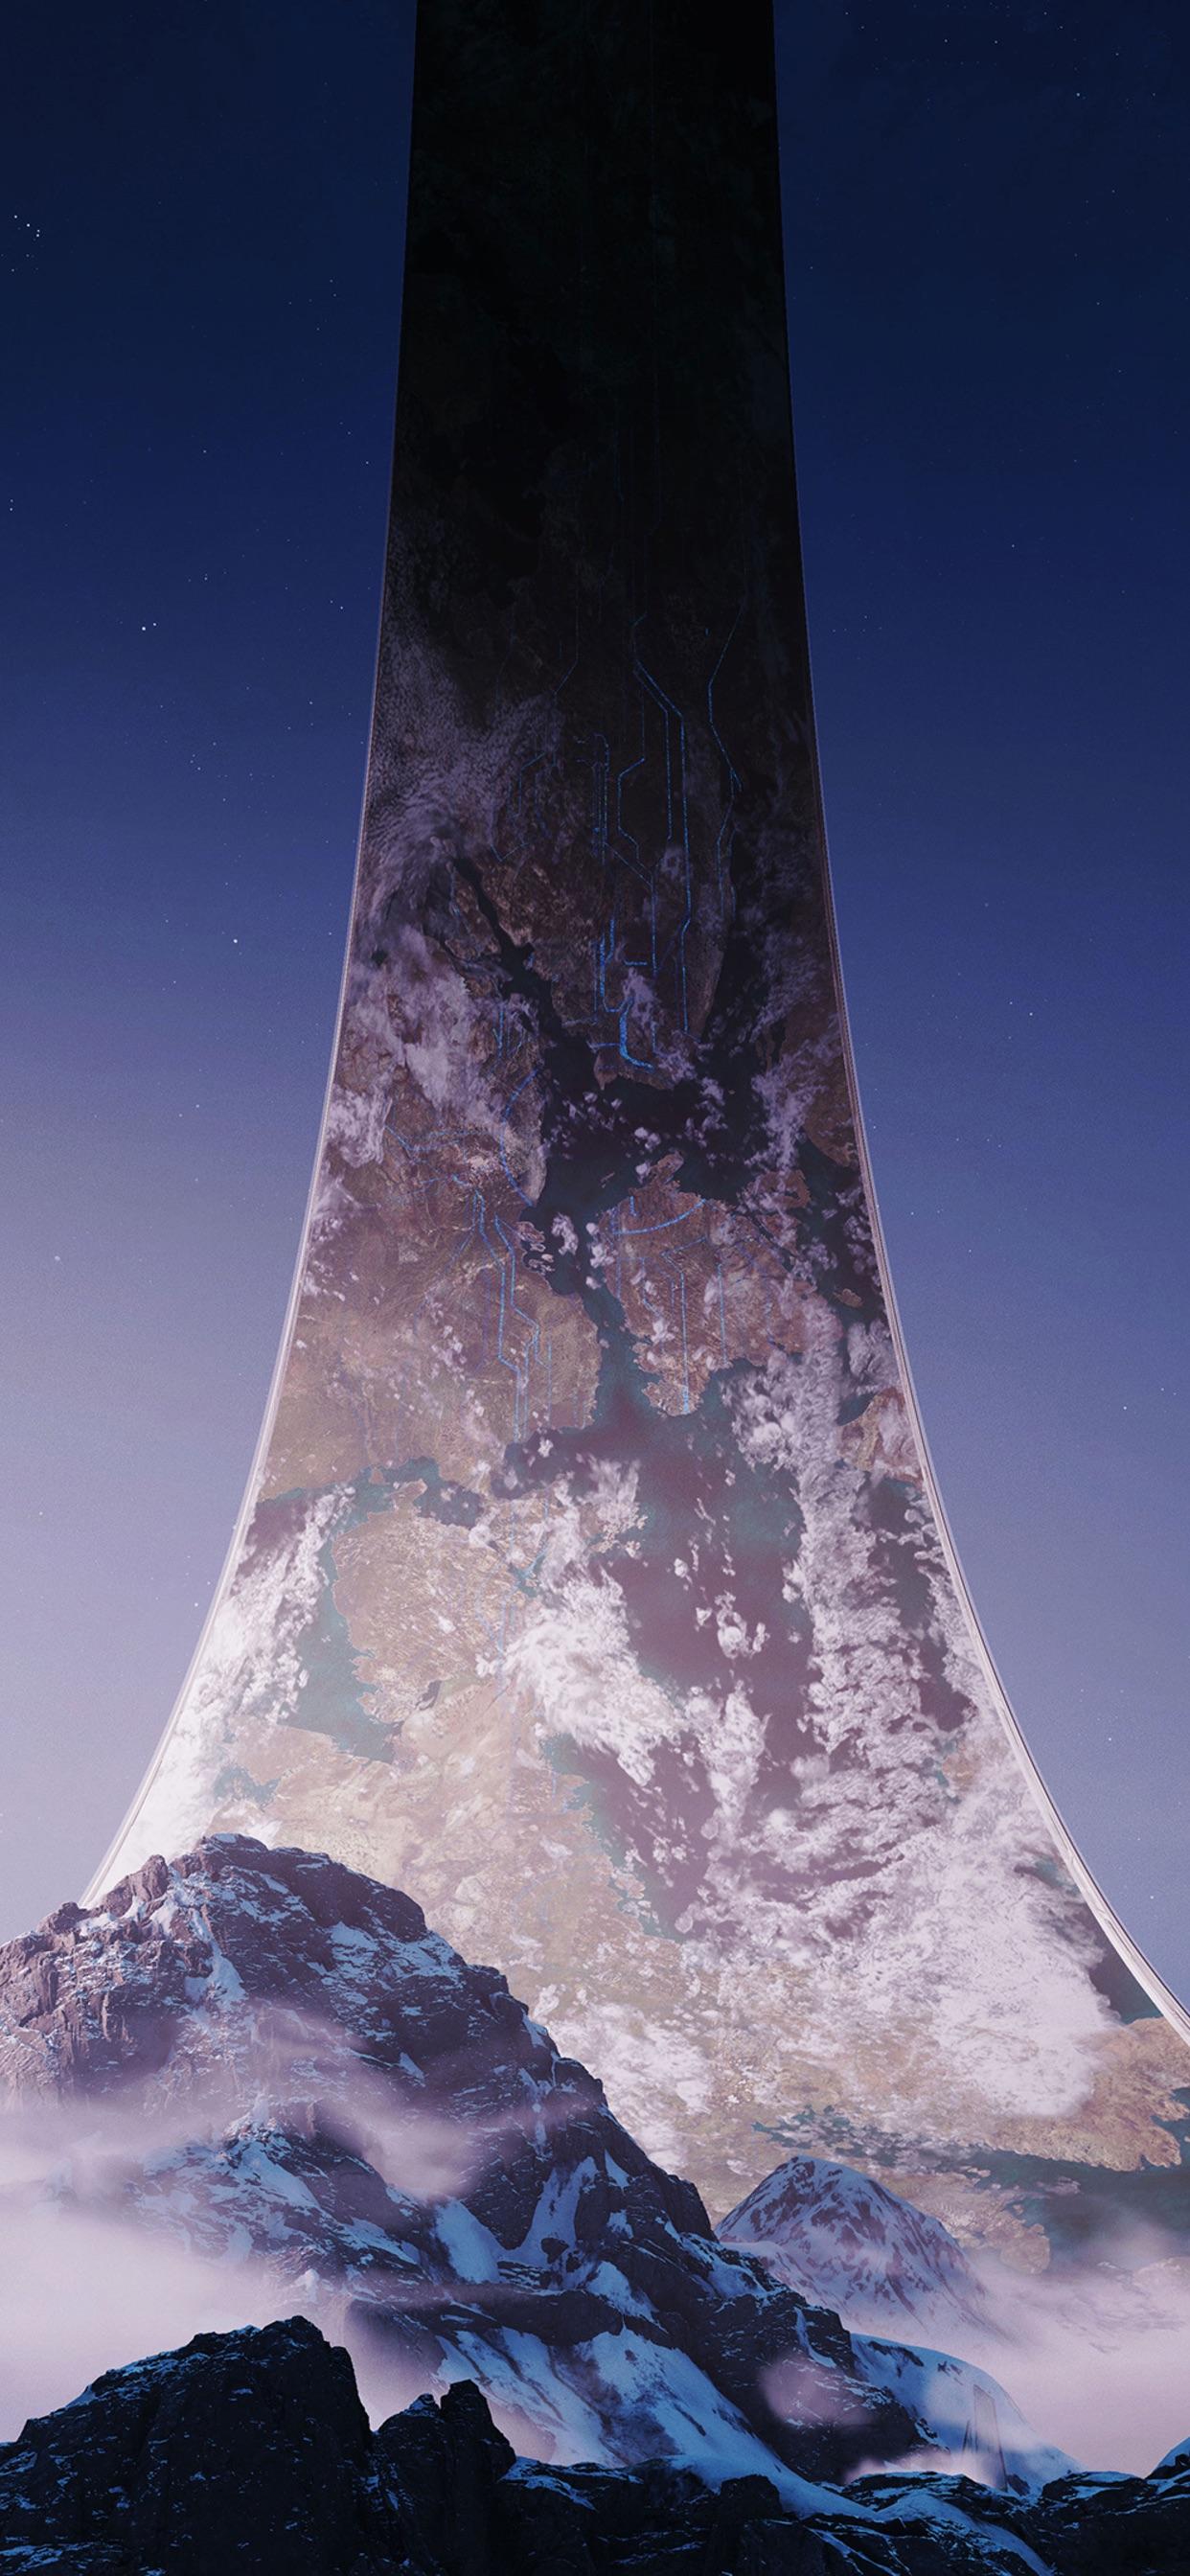 Looking for neat Halo wallpaper for the iPhone XS Max (1242x2688) Anyone have some they wanna share?